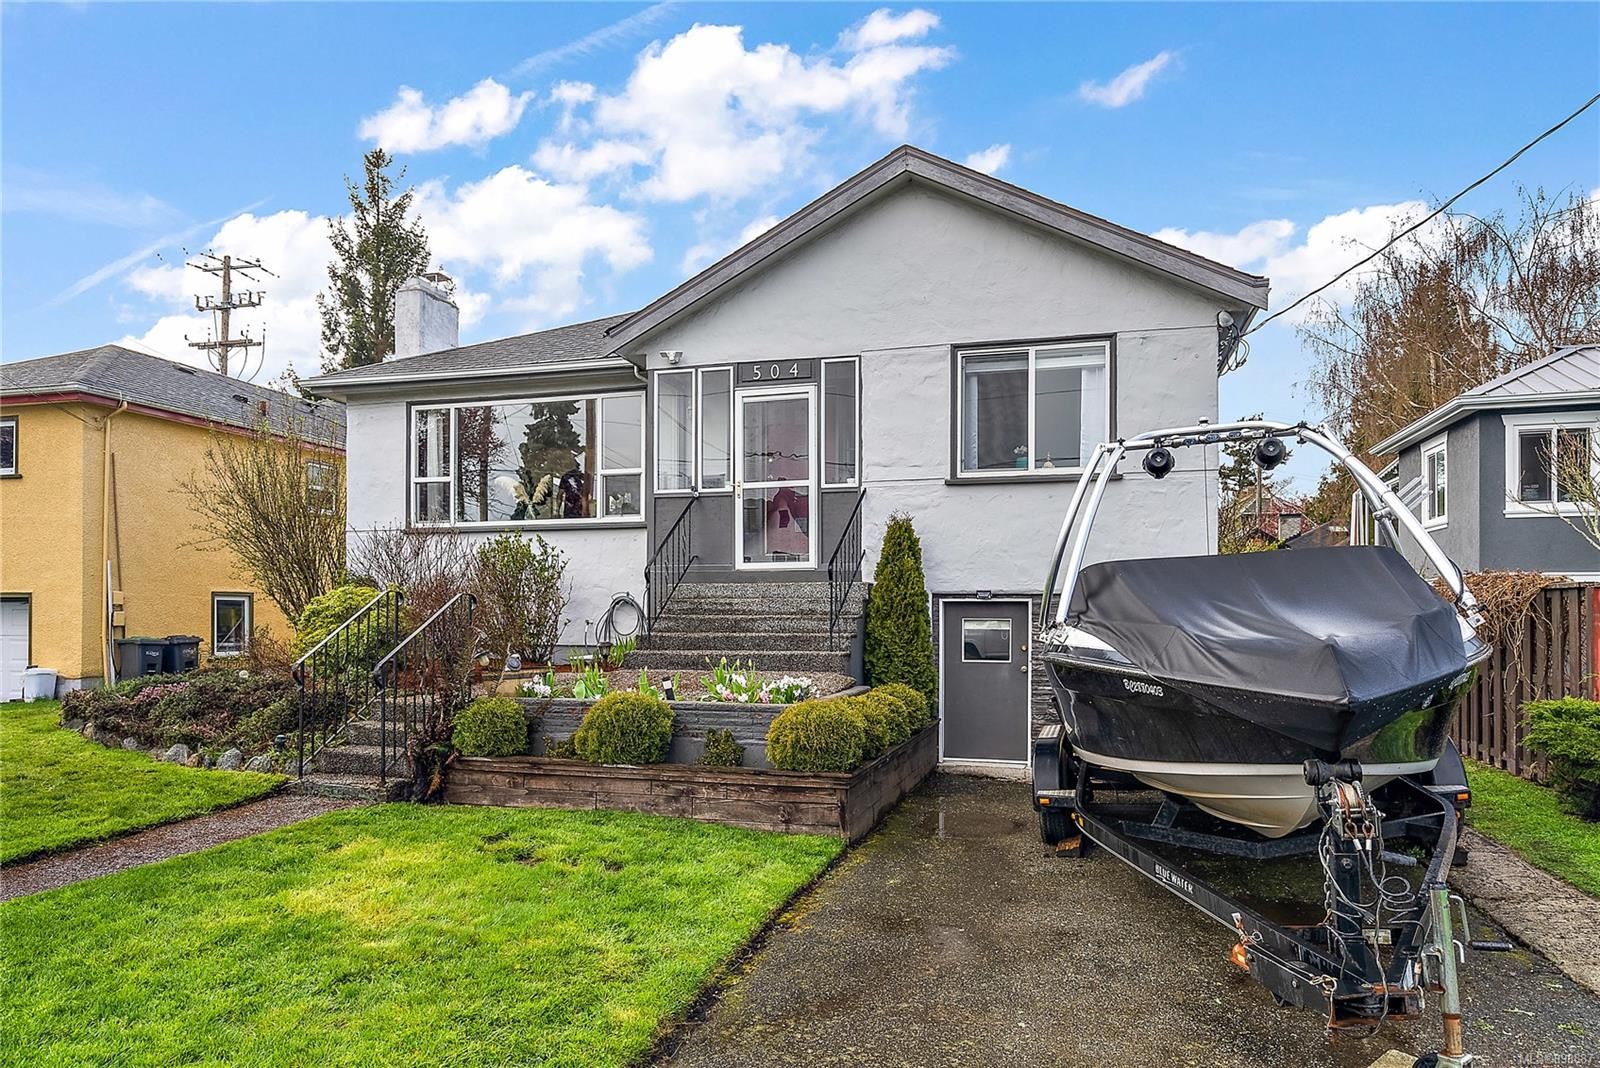 New property listed in Es Saxe Point, Esquimalt